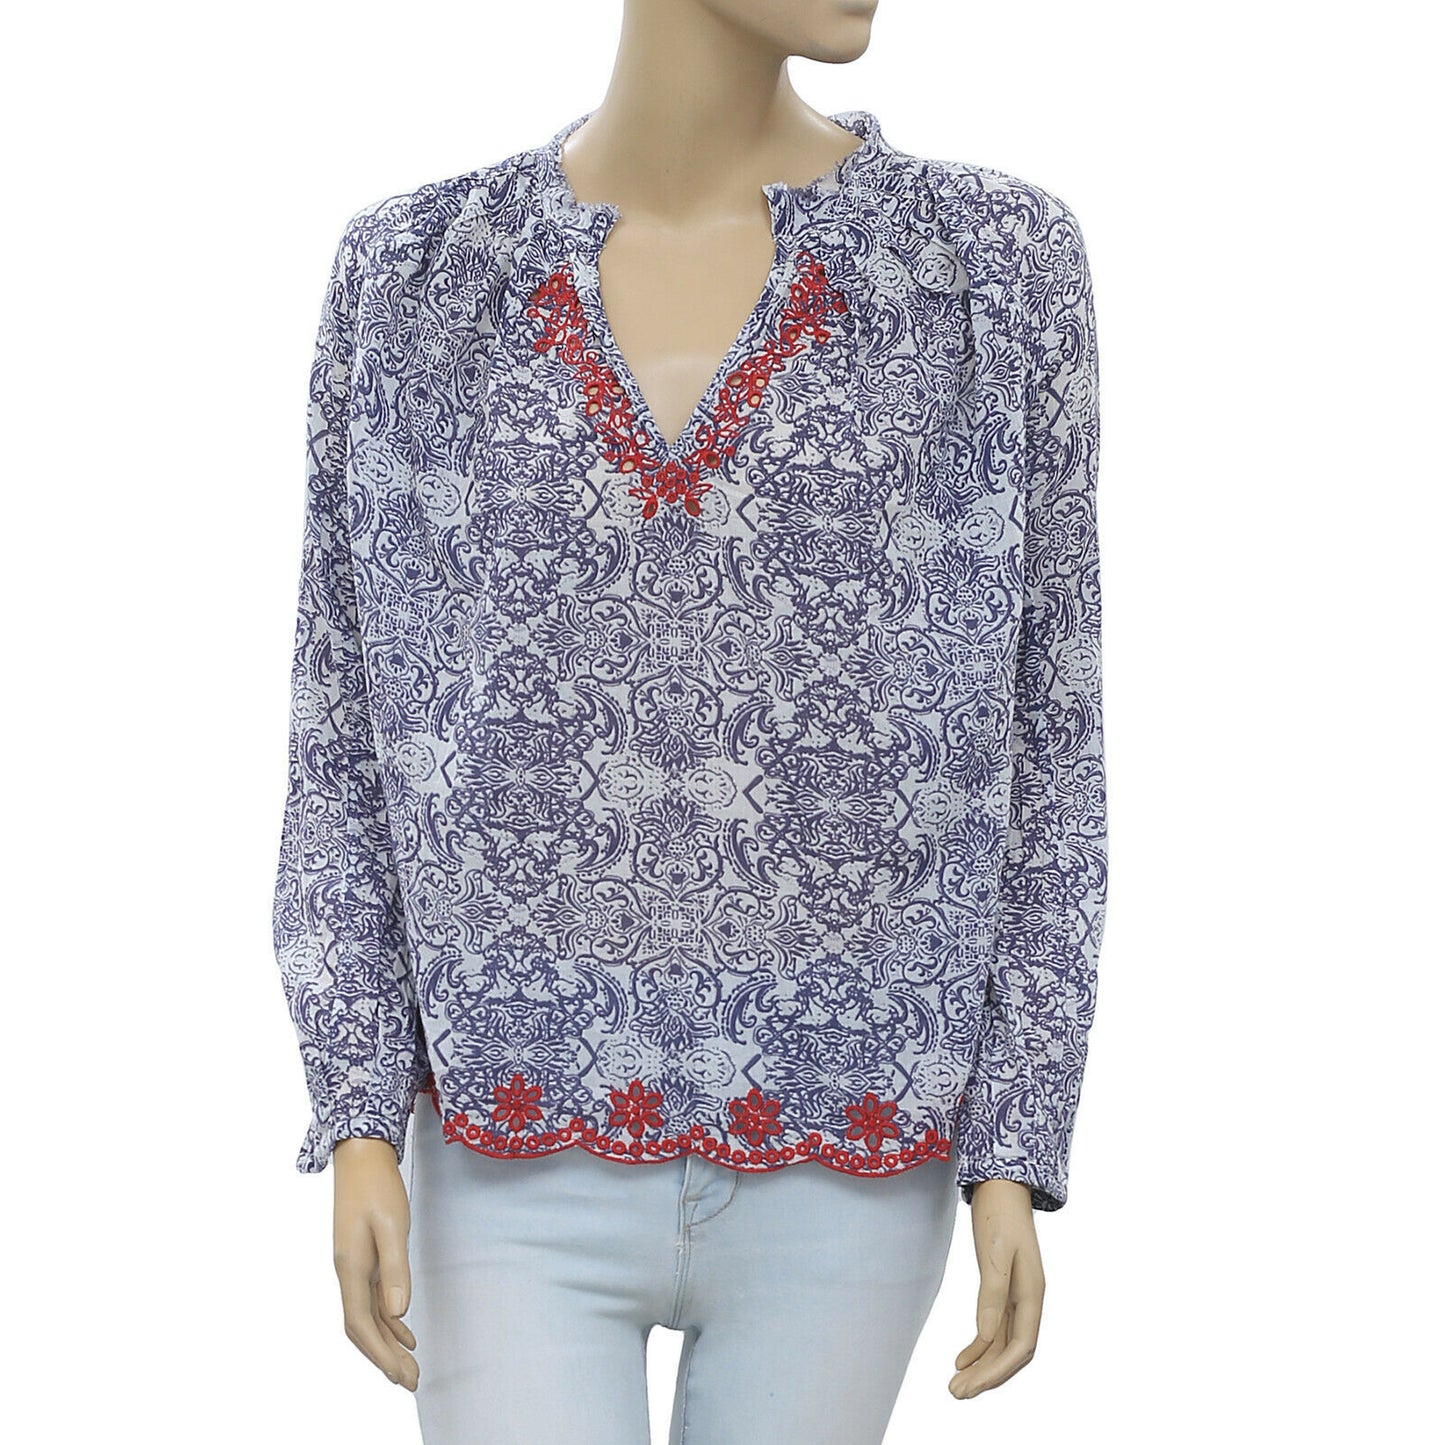 Berenice Eyelet Embroidered Floral Printed Blouse Top